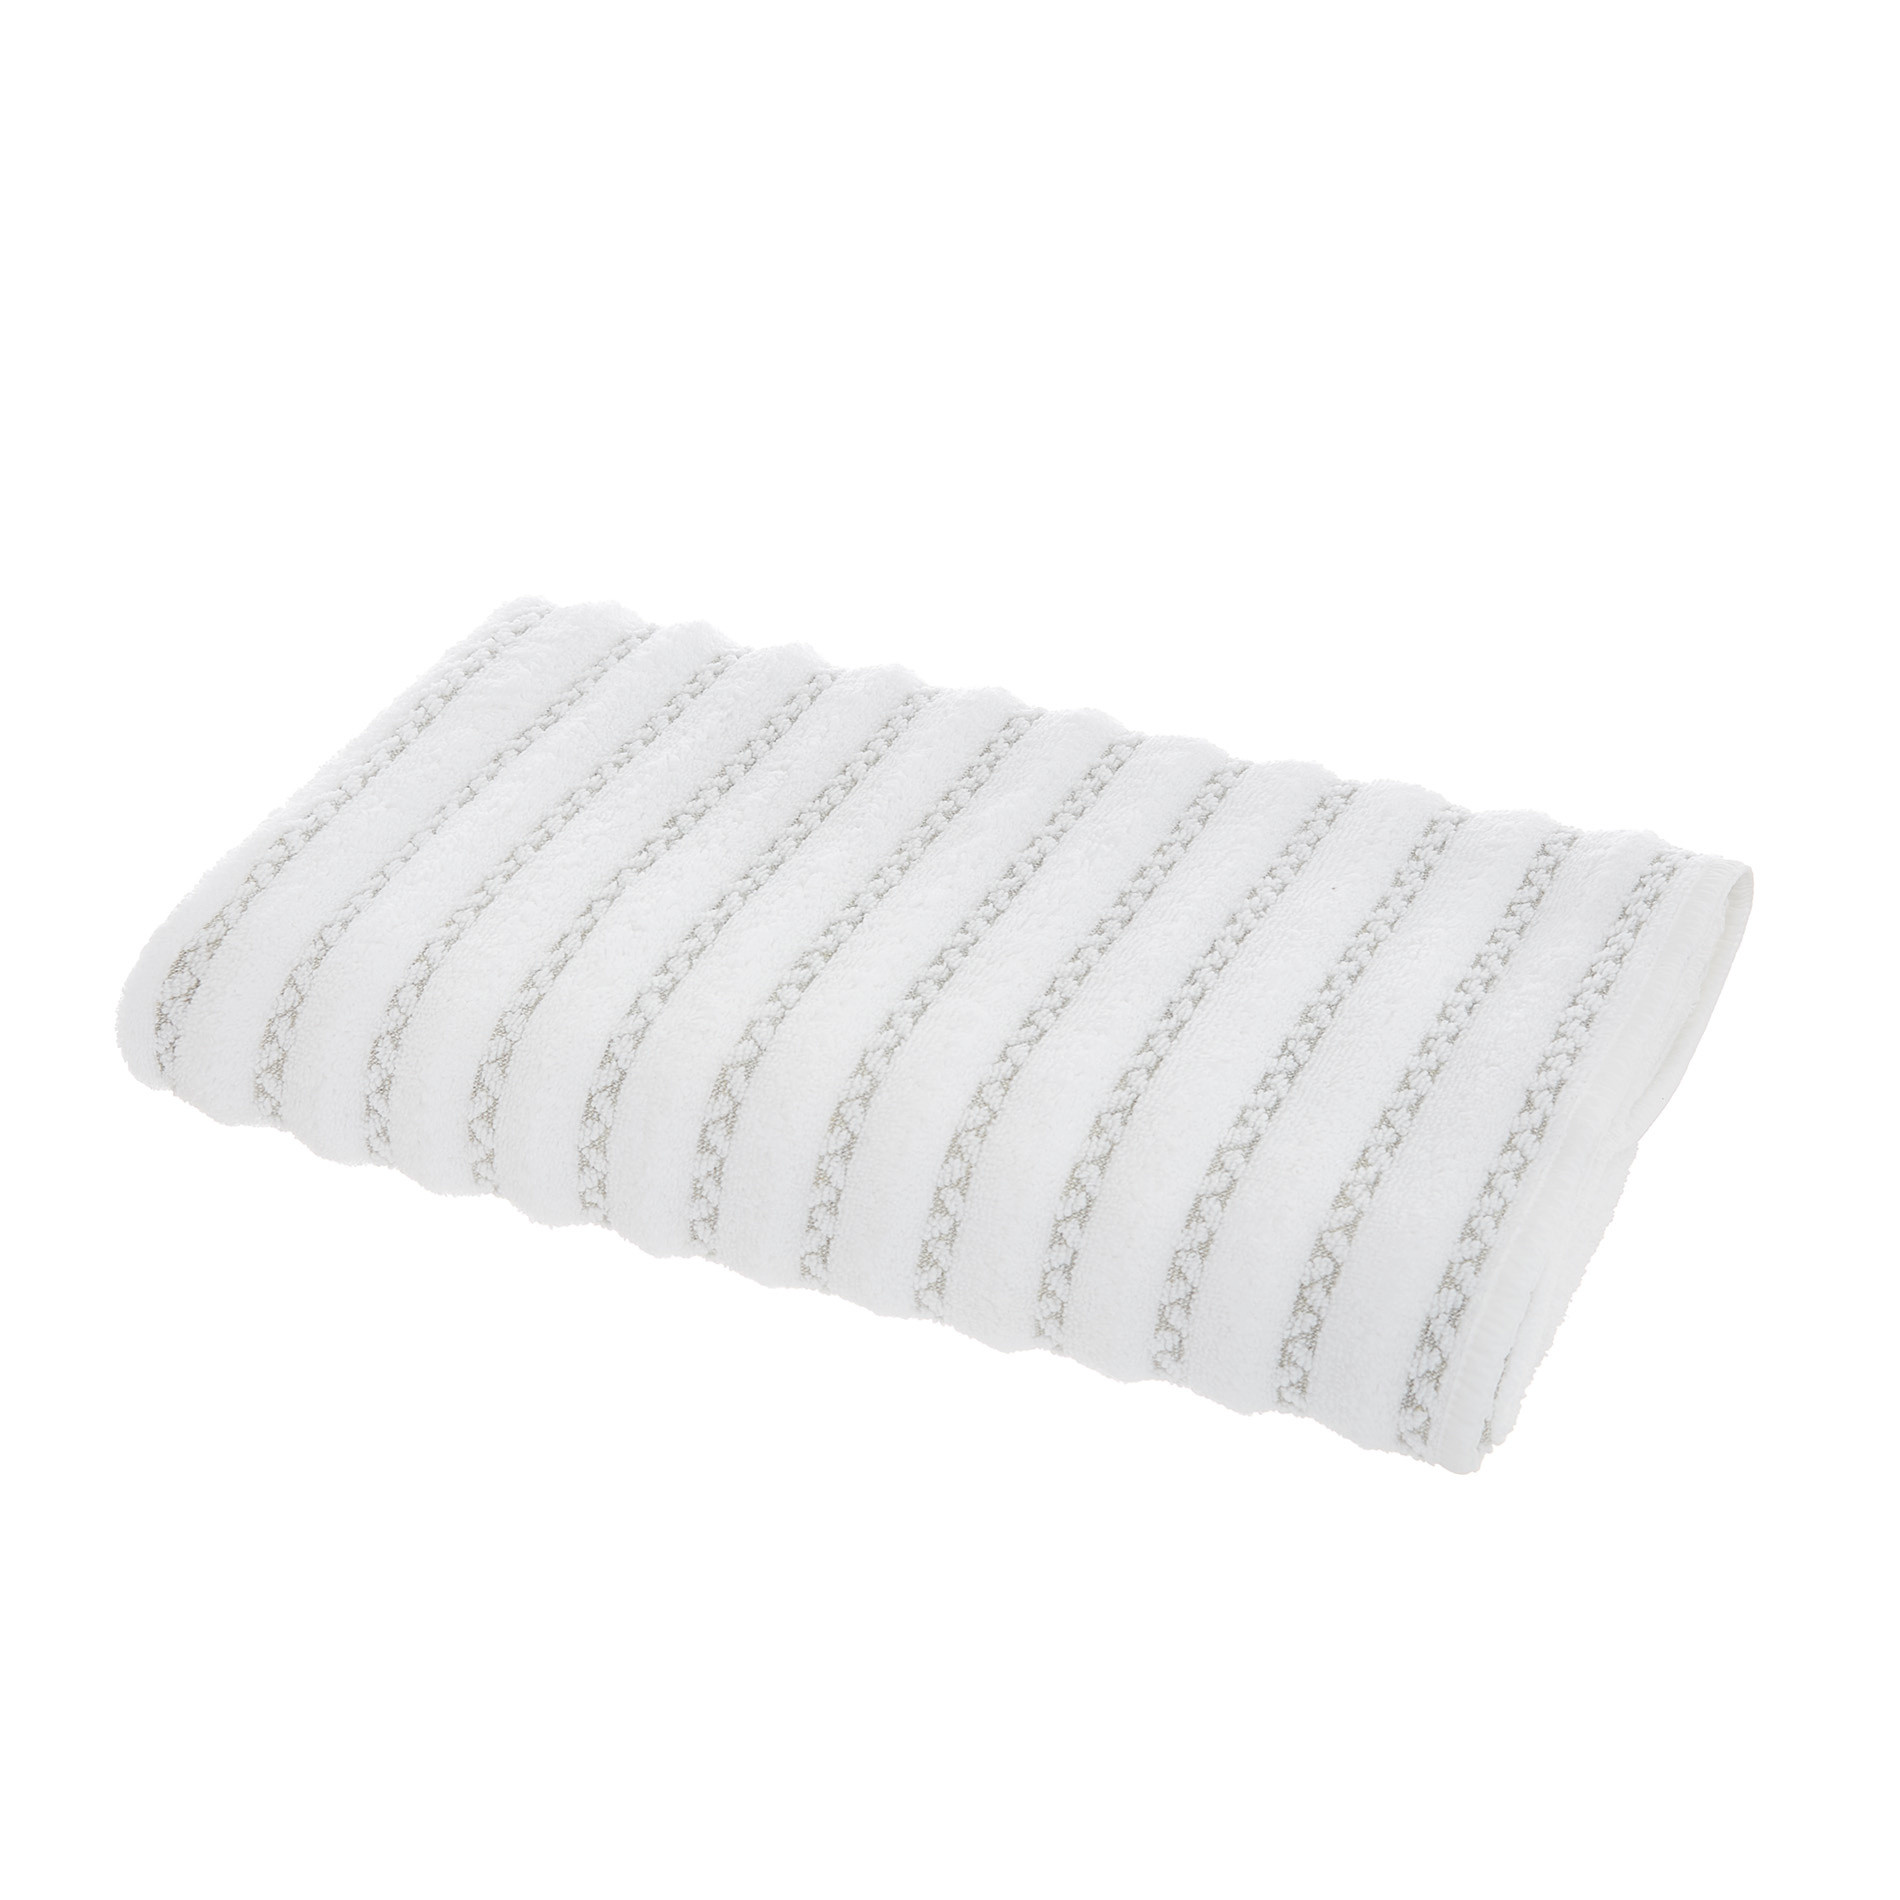 Thermae striped towel in 100% cotton, White, large image number 1